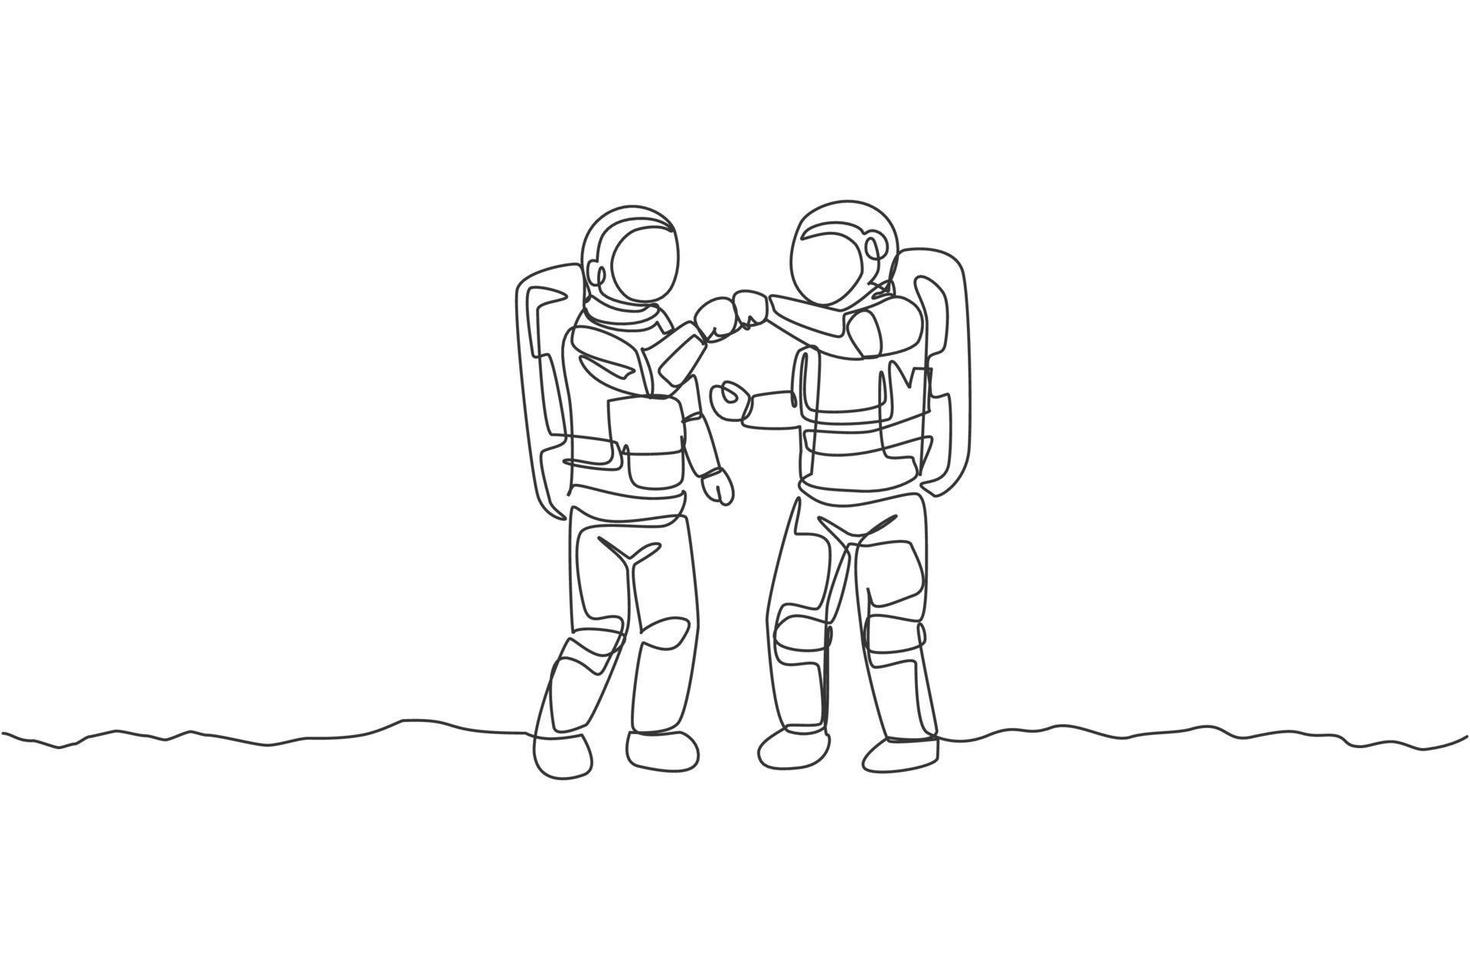 One single line drawing of two young astronauts giving fist bump to celebrate success teamwork in moon surface vector illustration. Cosmonaut outer space concept. Modern continuous line draw design